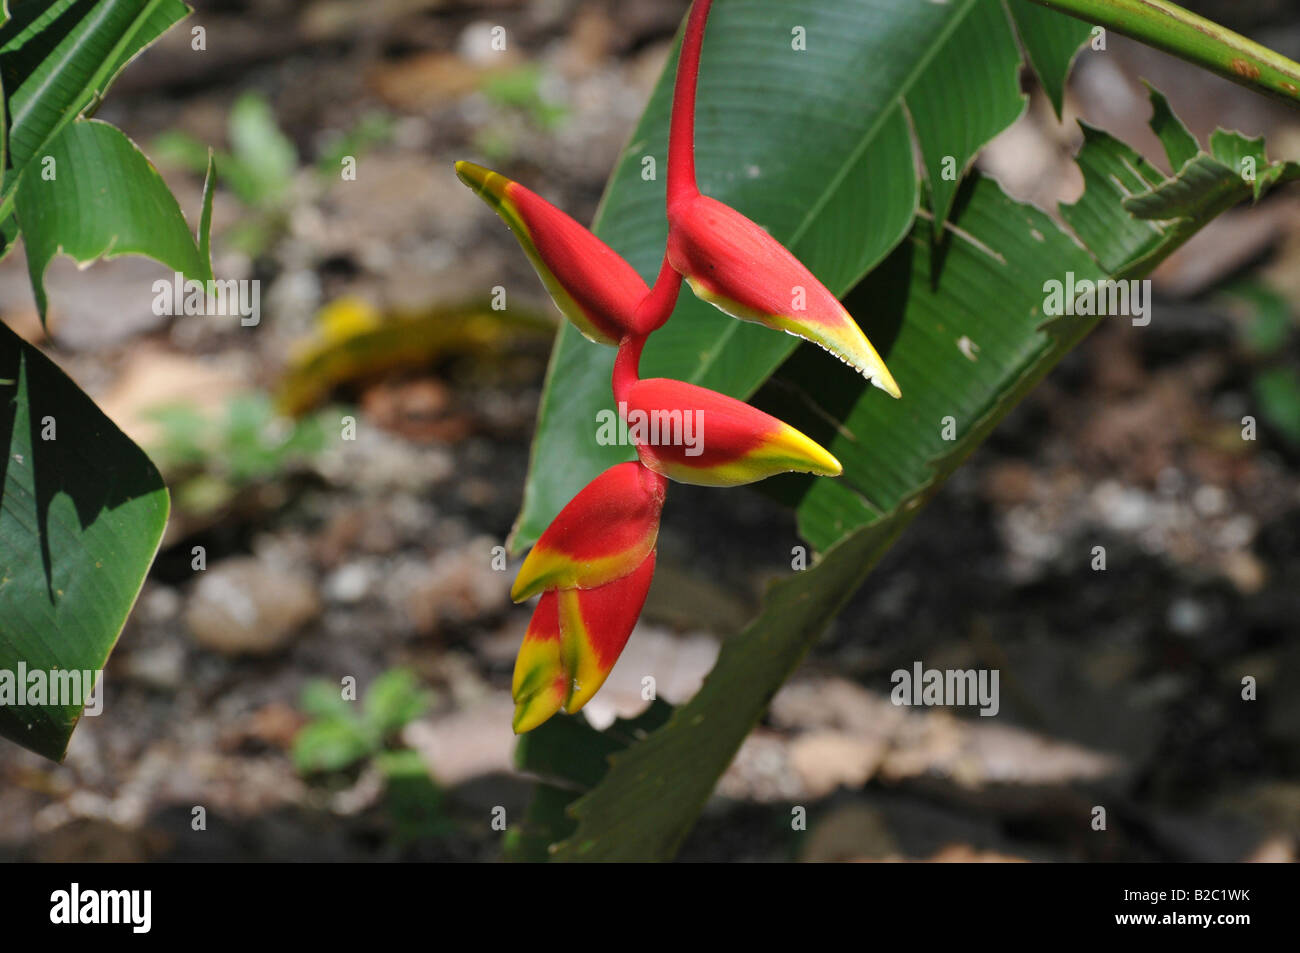 Lobster-claw, Wild Plantain or False Bird-of-paradise (Heliconia), Lamanai, Belize, Central America Stock Photo